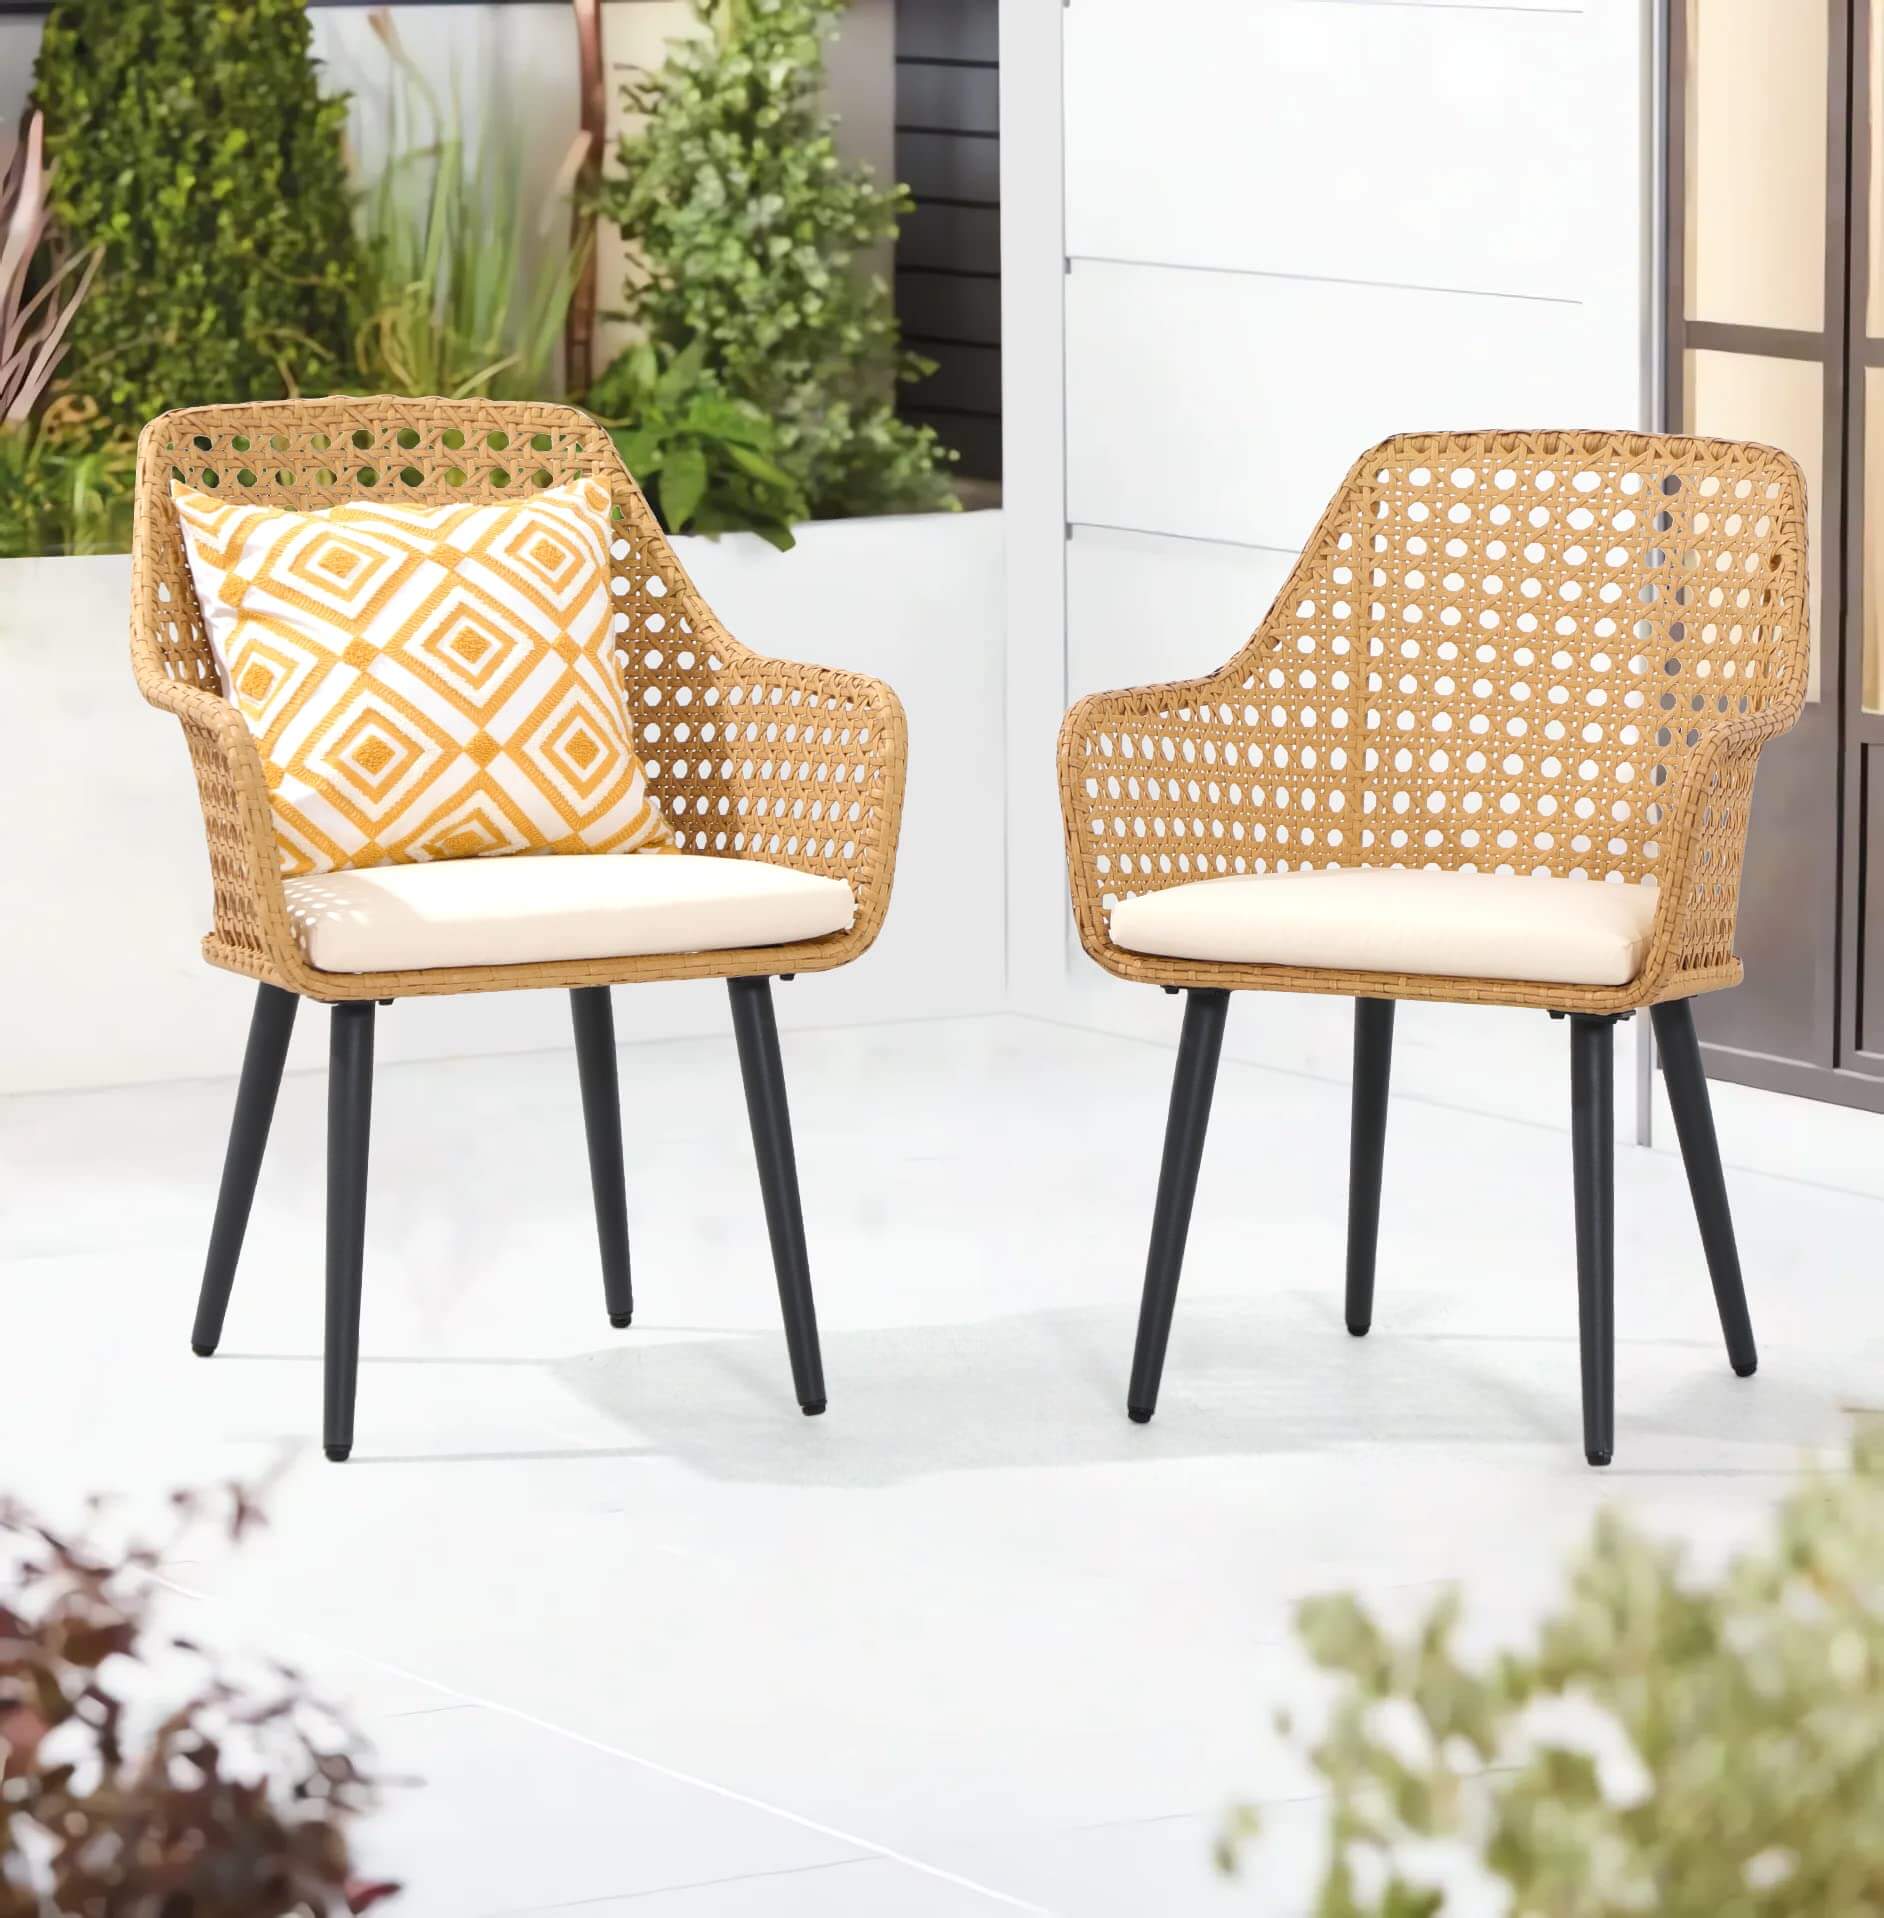 Patio Dining Chair, All-Weather Wicker Outdoor Dining Chair Set of 2, Rattan Armchair Seating with Cushion